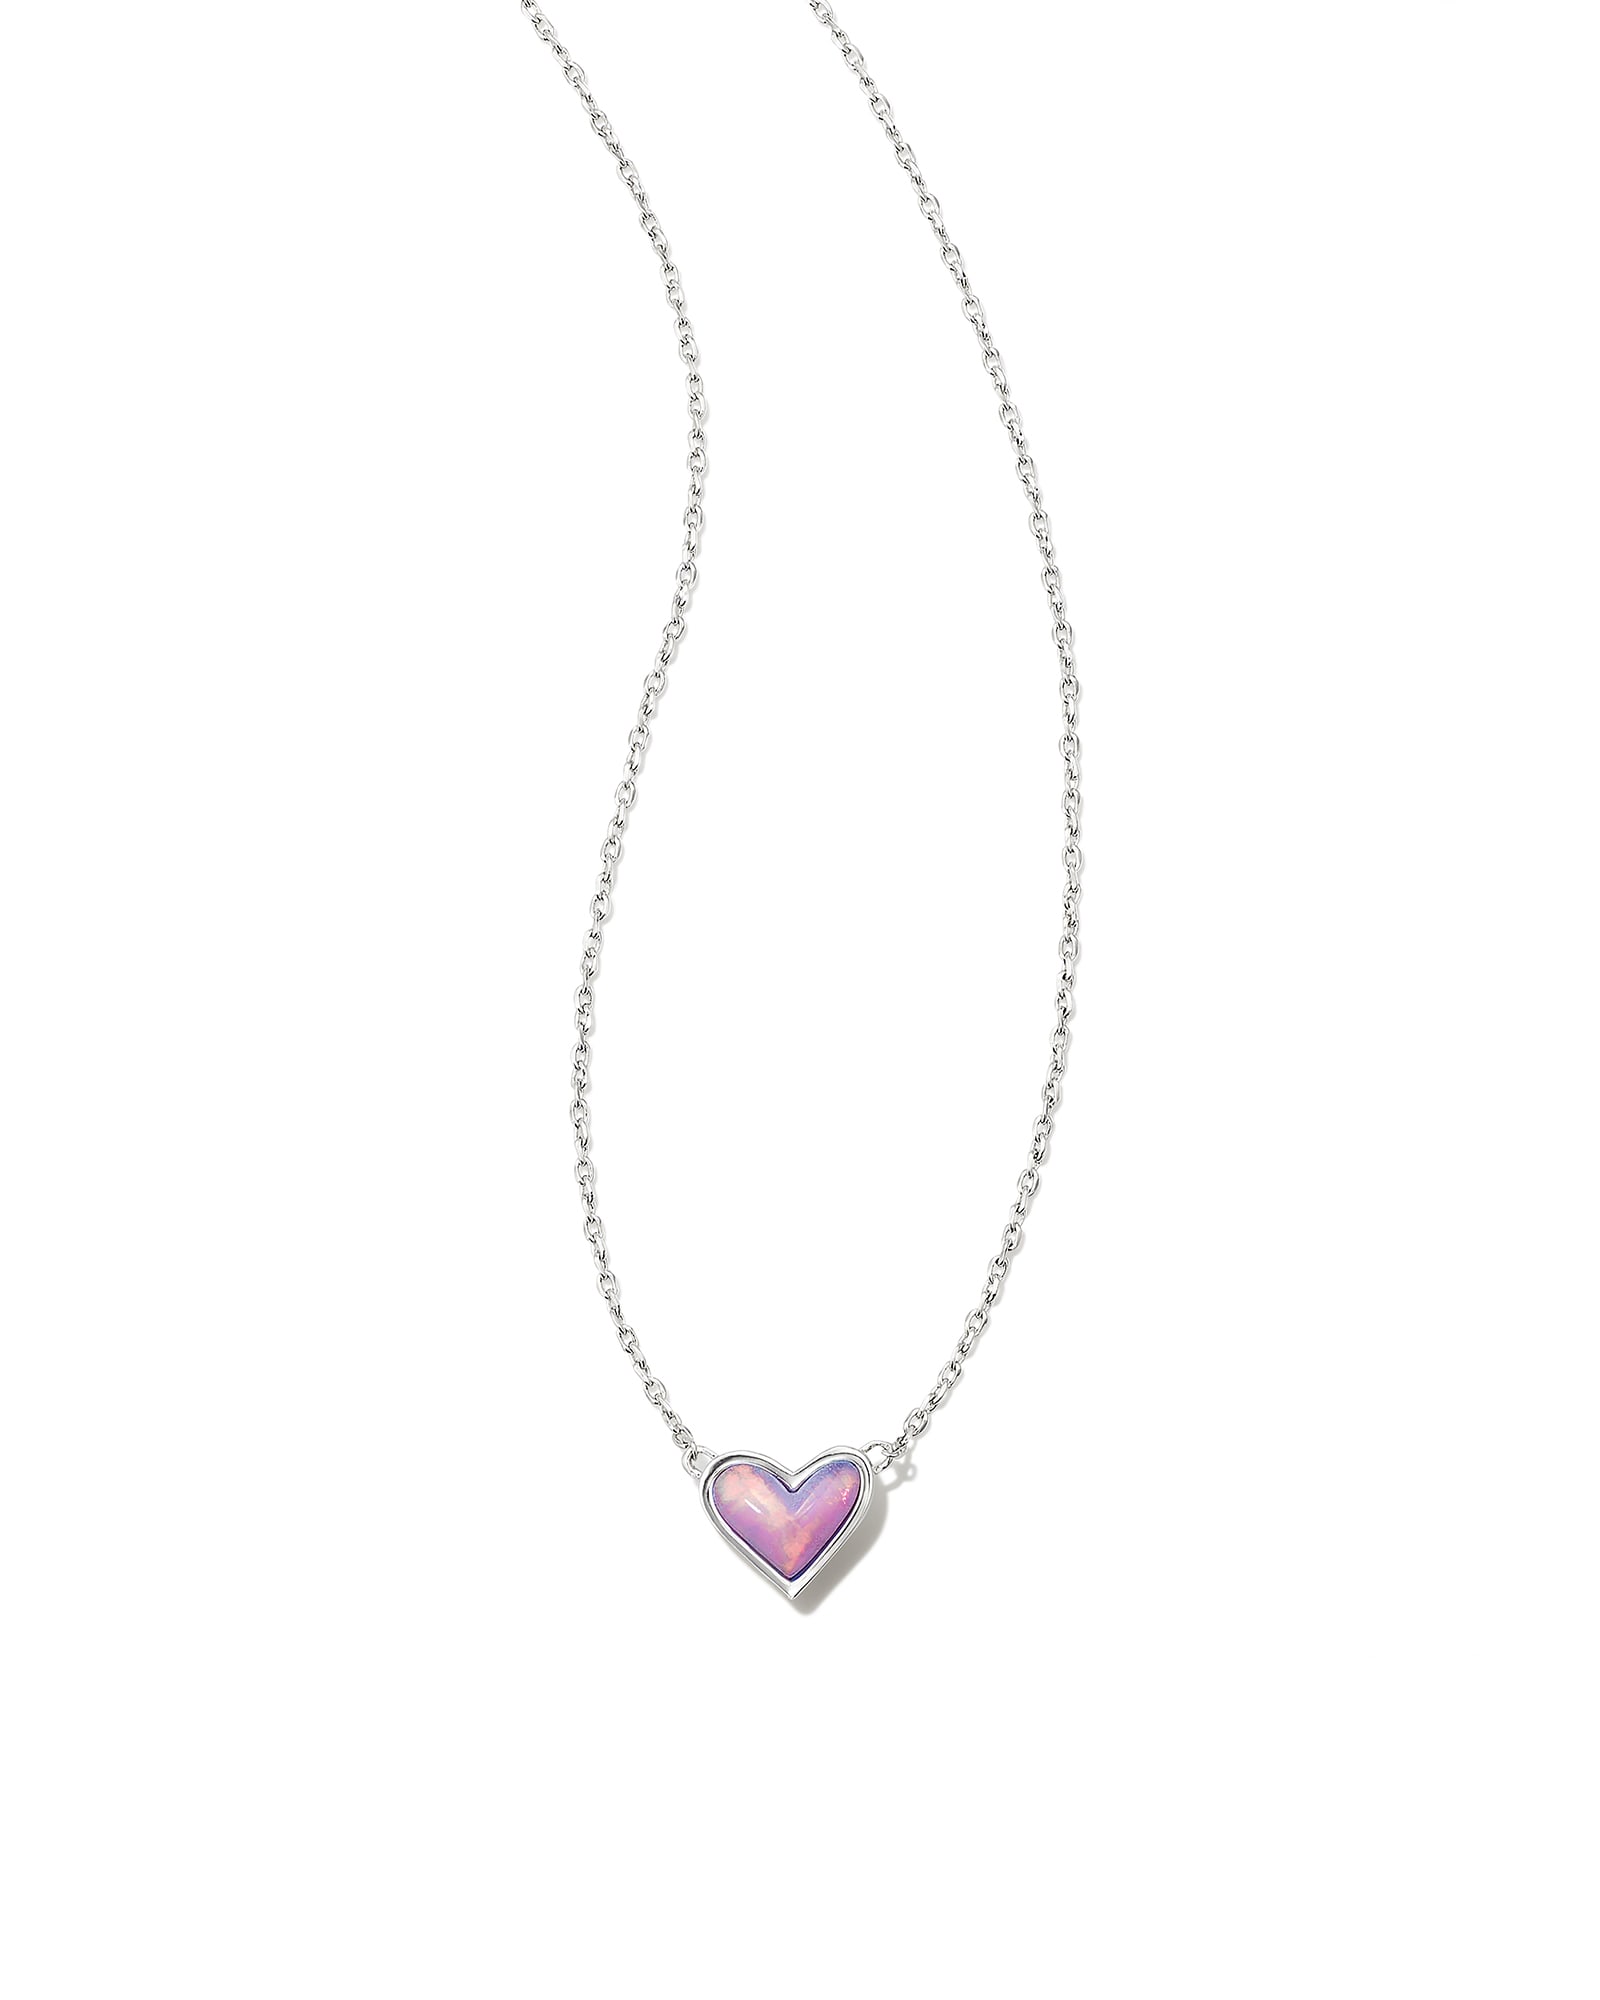 Framed Ari Heart Gold Short Pendant Necklace in Red Opalescent